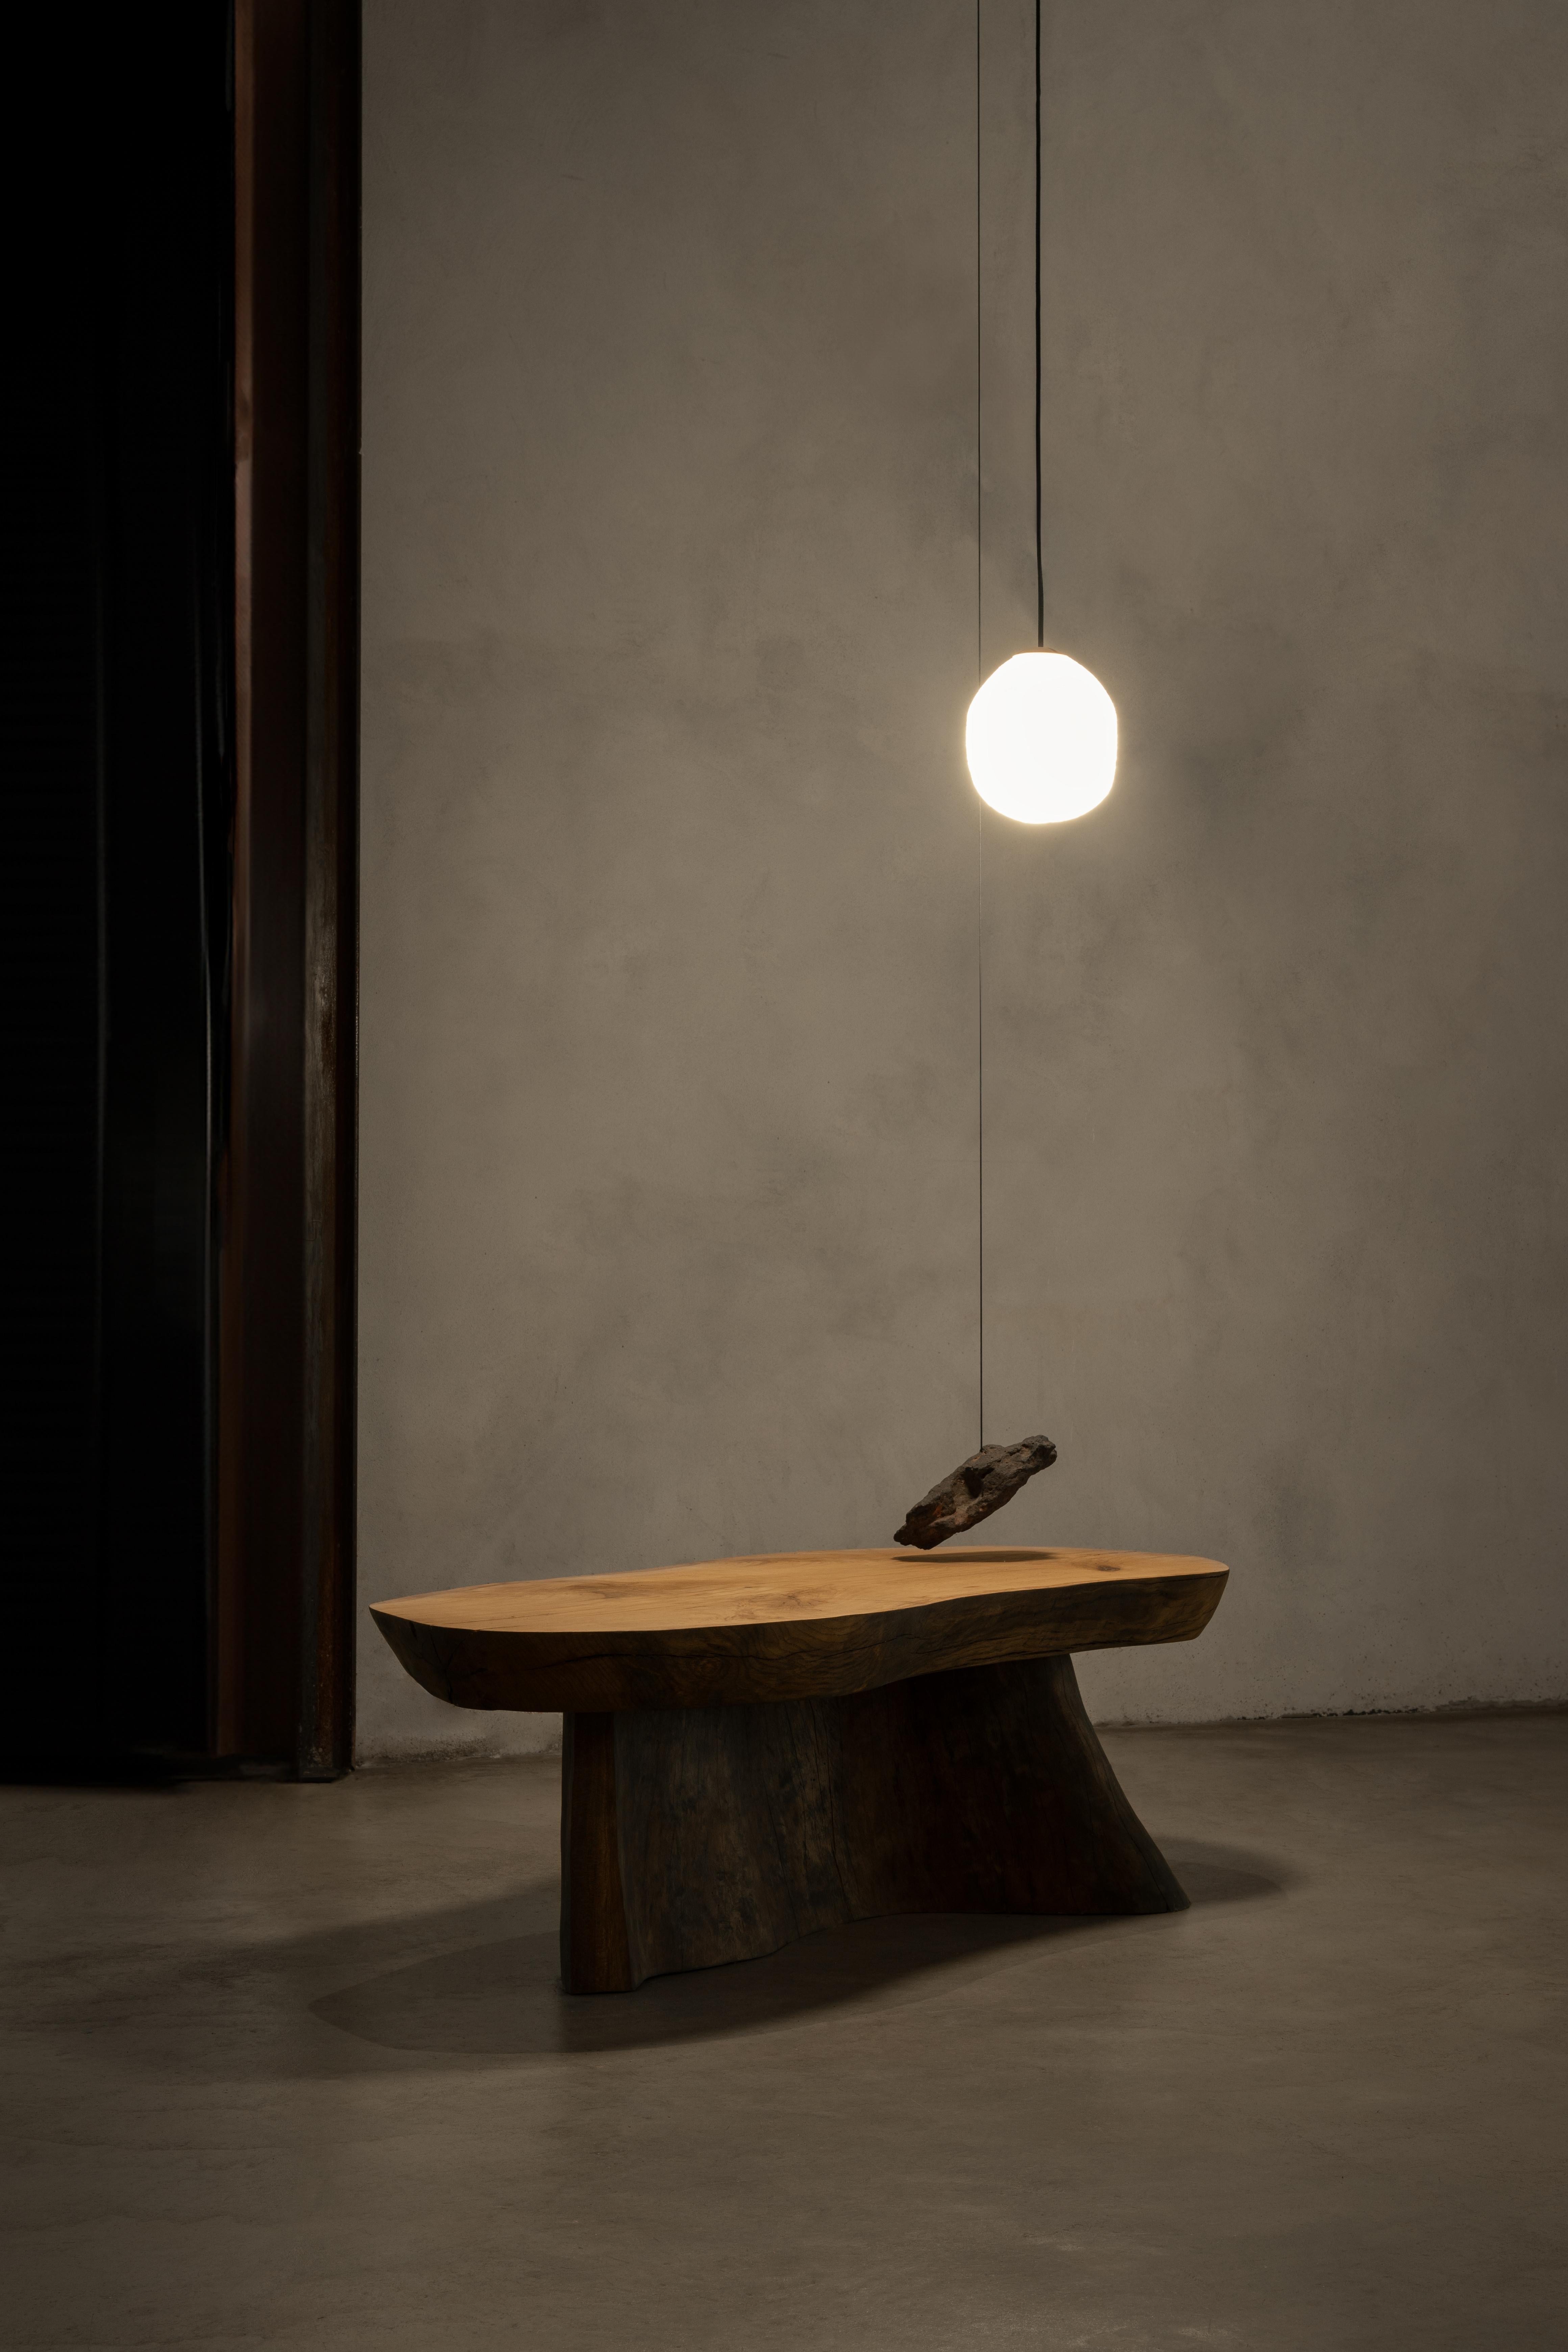 Genesis Coffee Table and Suspension Lamp by Jérôme Pereira 
Dimensions: D 50 x W 130 x H 40 cm
Materials: Oak, plane tree, blown glass, volcanic stone.

All our lamps can be wired according to each country. If sold to the USA it will be wired for